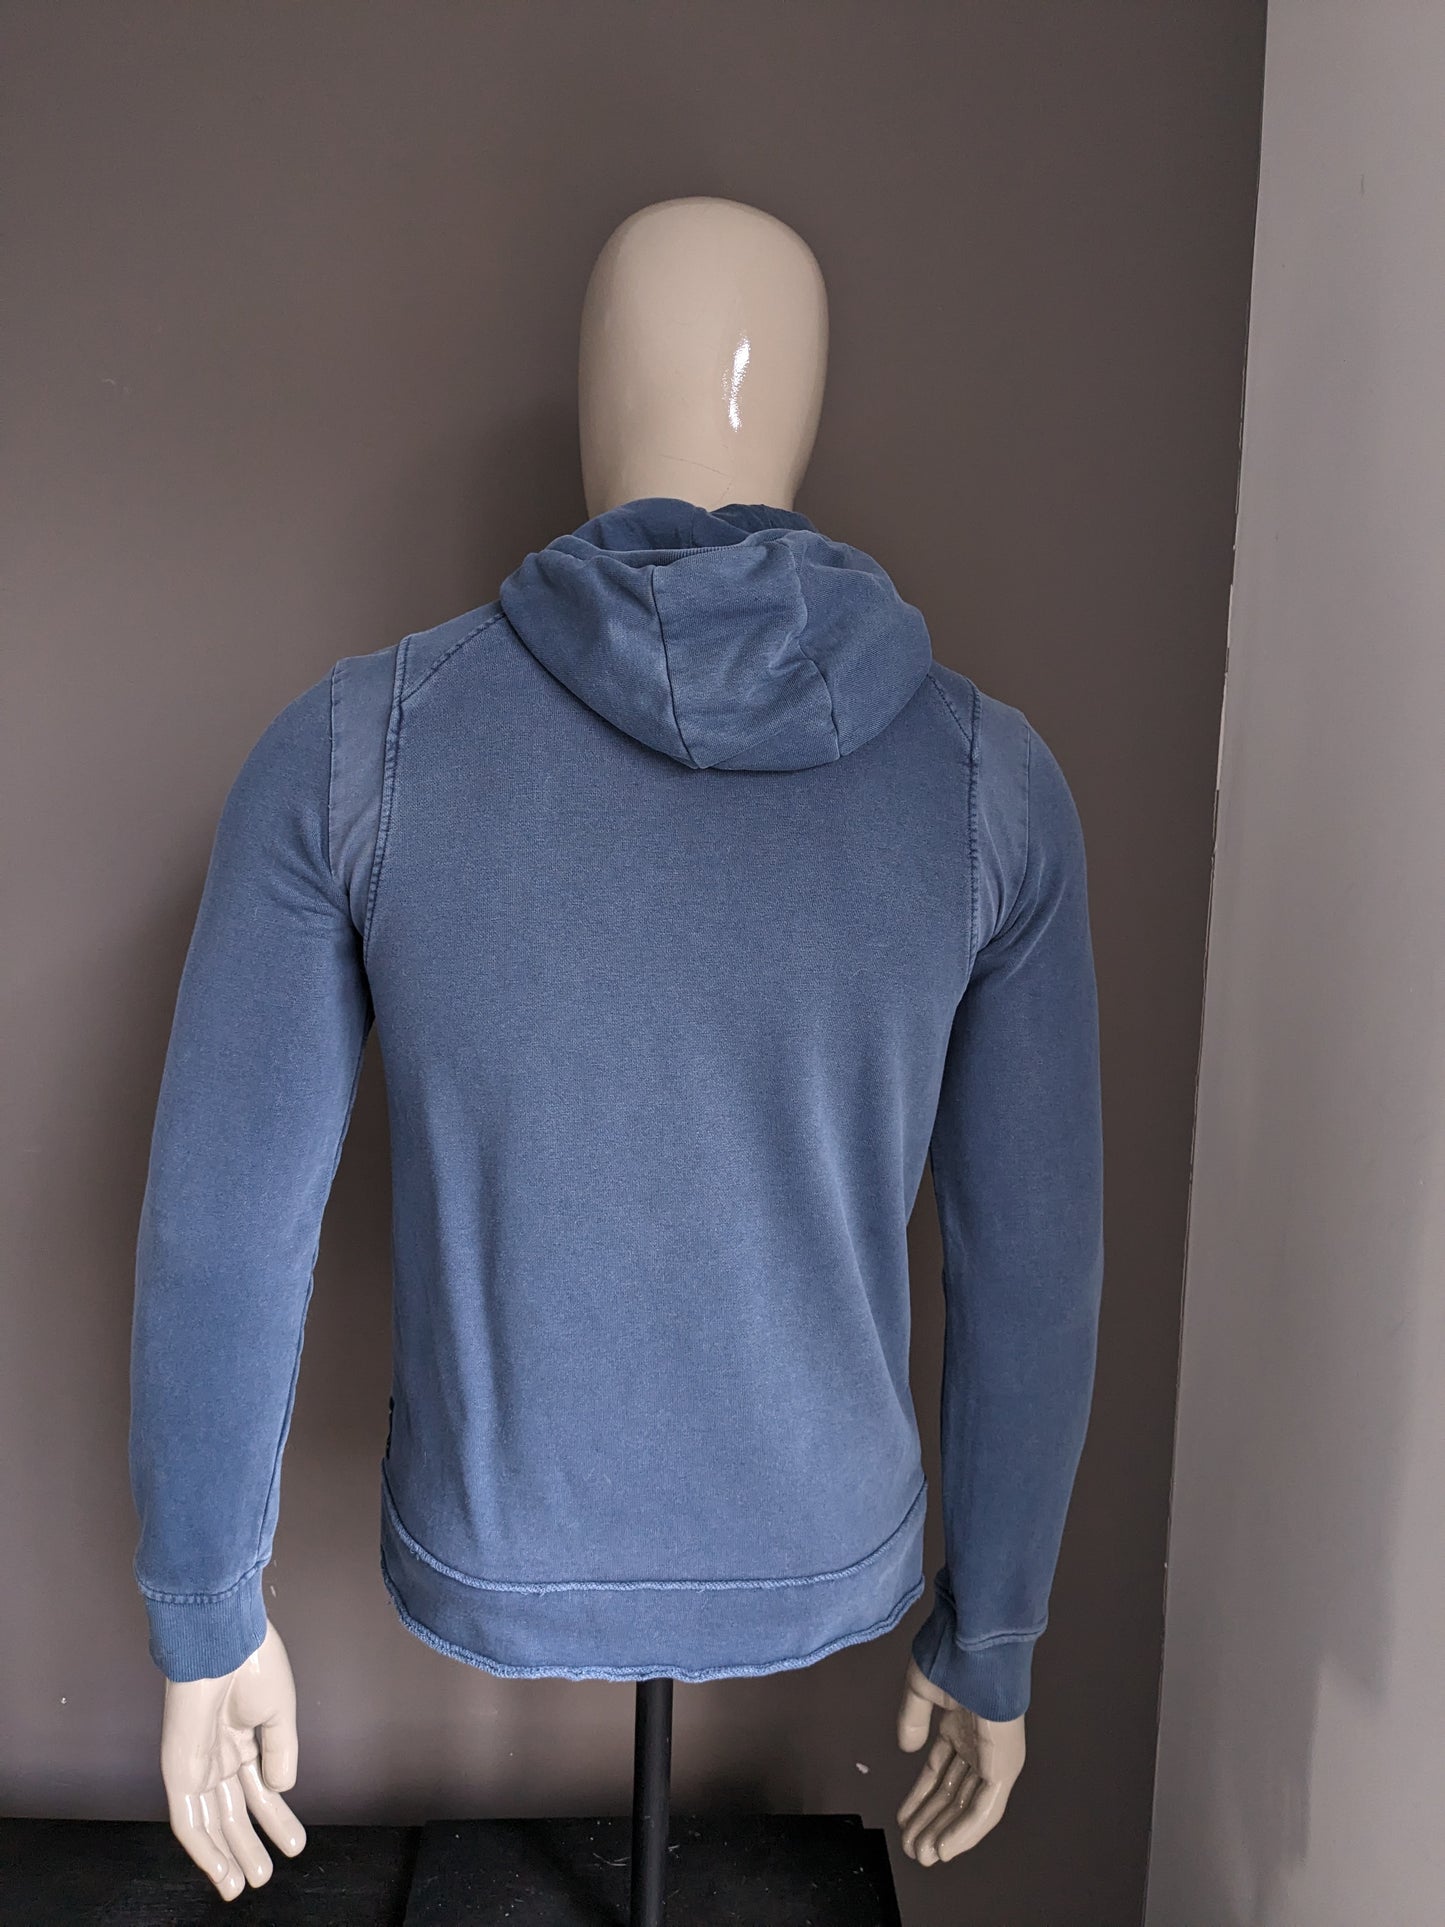 Armani Jeans cardigan with hood. Blue. Size M / S.